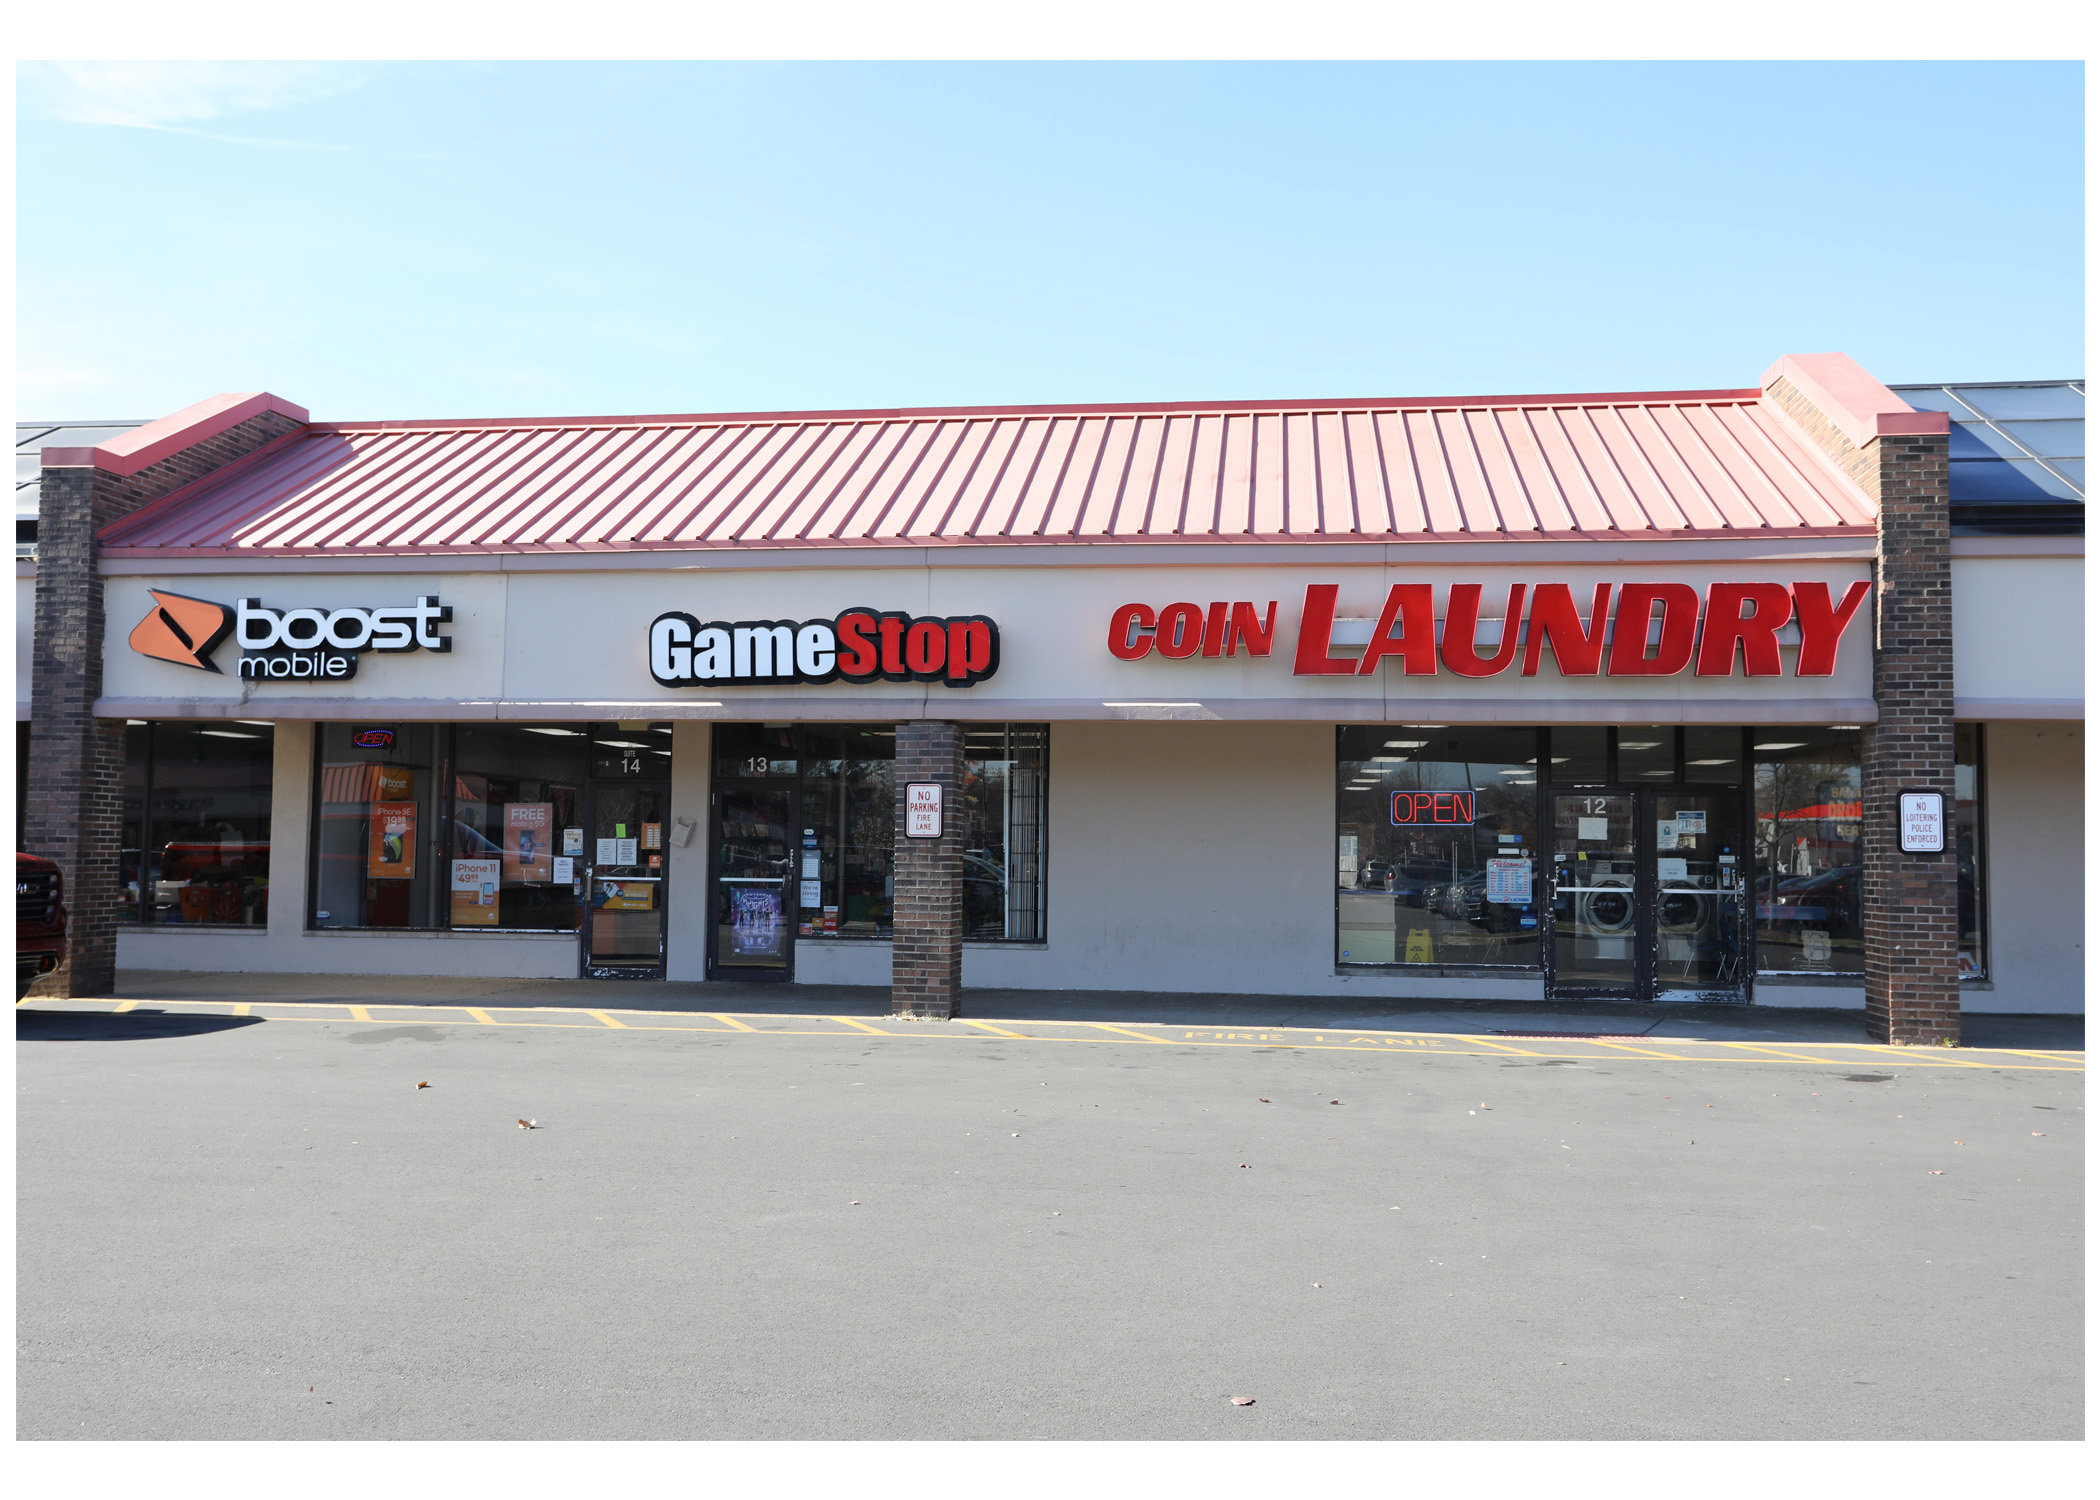 Linwood Square Boost Mobile, GameStop and Coin Laundry